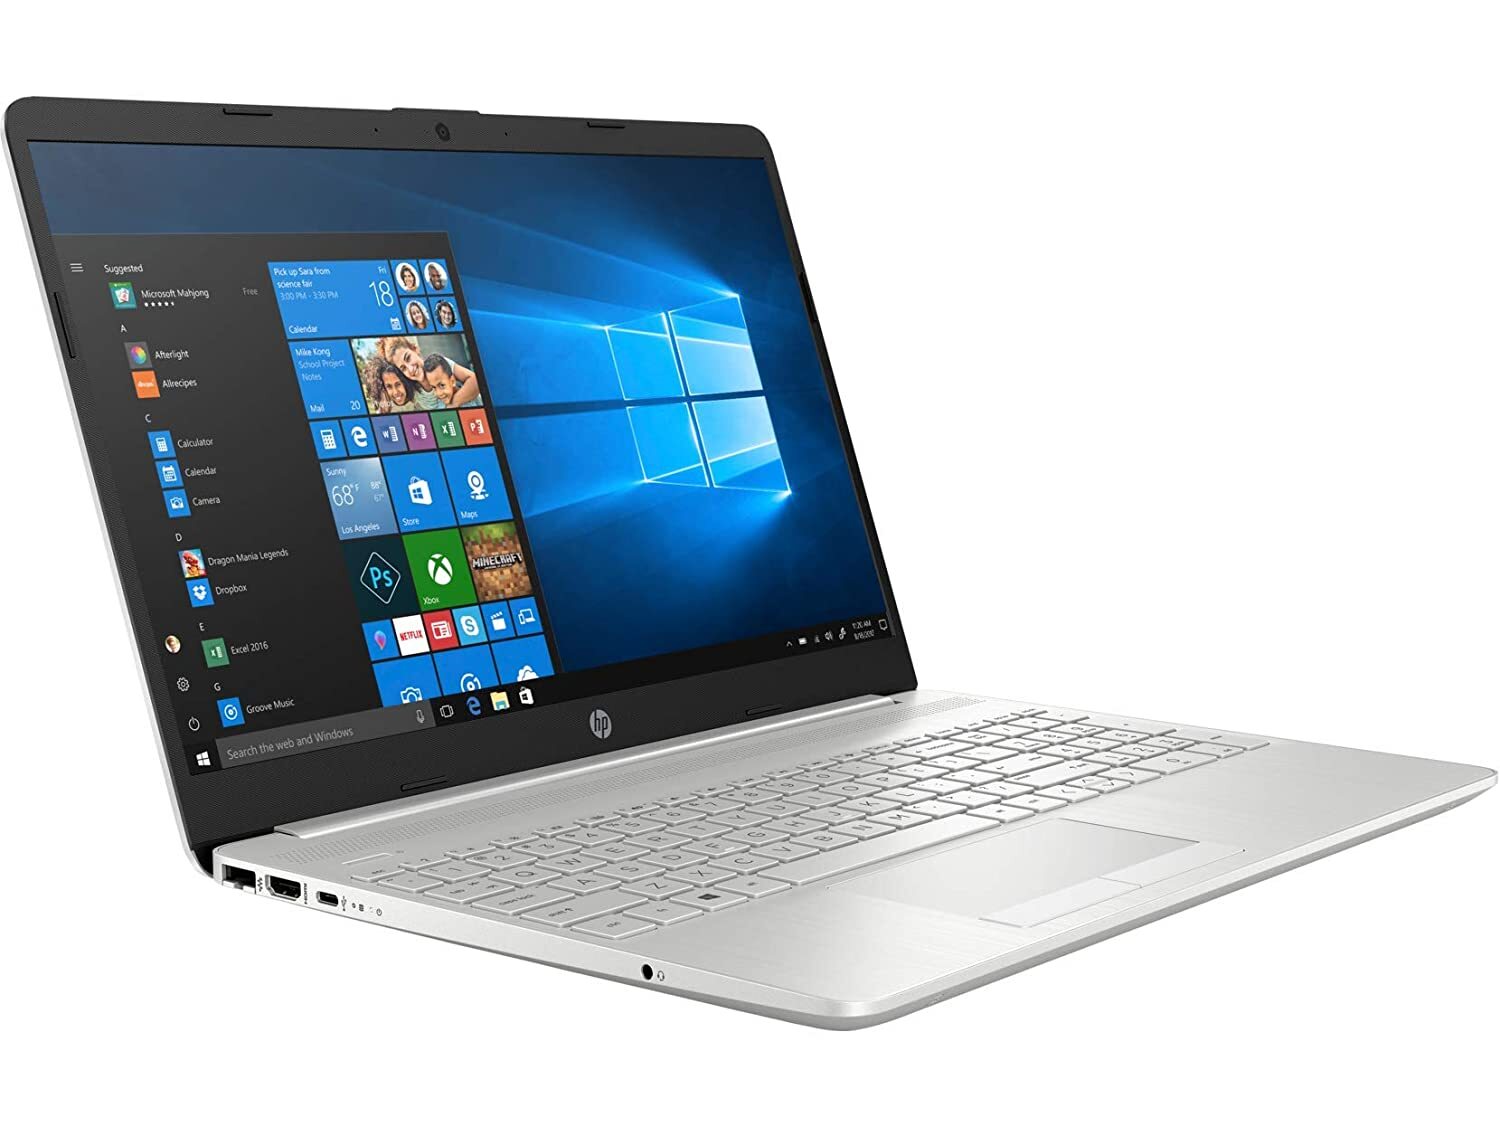 HP 15 10th Gen Core i5 15.6-inch FHD Laptop (i5-10210U/8GB/1TB HDD + 256GB SSD/Win 10/MS Office/2GB NVIDIA GeForce MX130 Graphics/Natural Silver/1.74kg)-M000000000529 www.mysocially.com